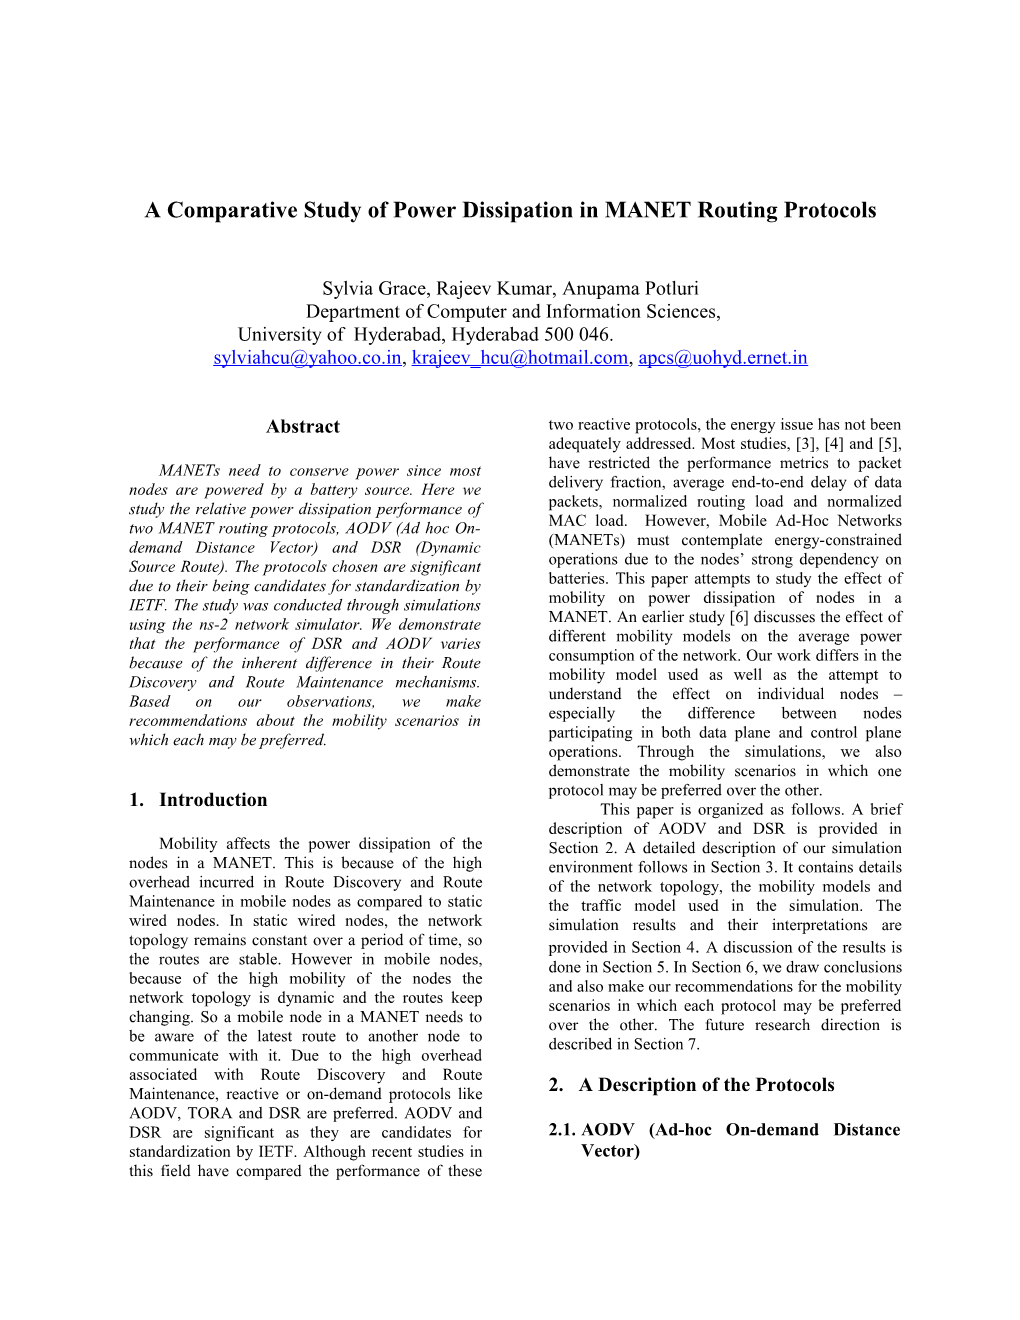 A Comparative Study of Power Dissipation in MANET Routing Protocols